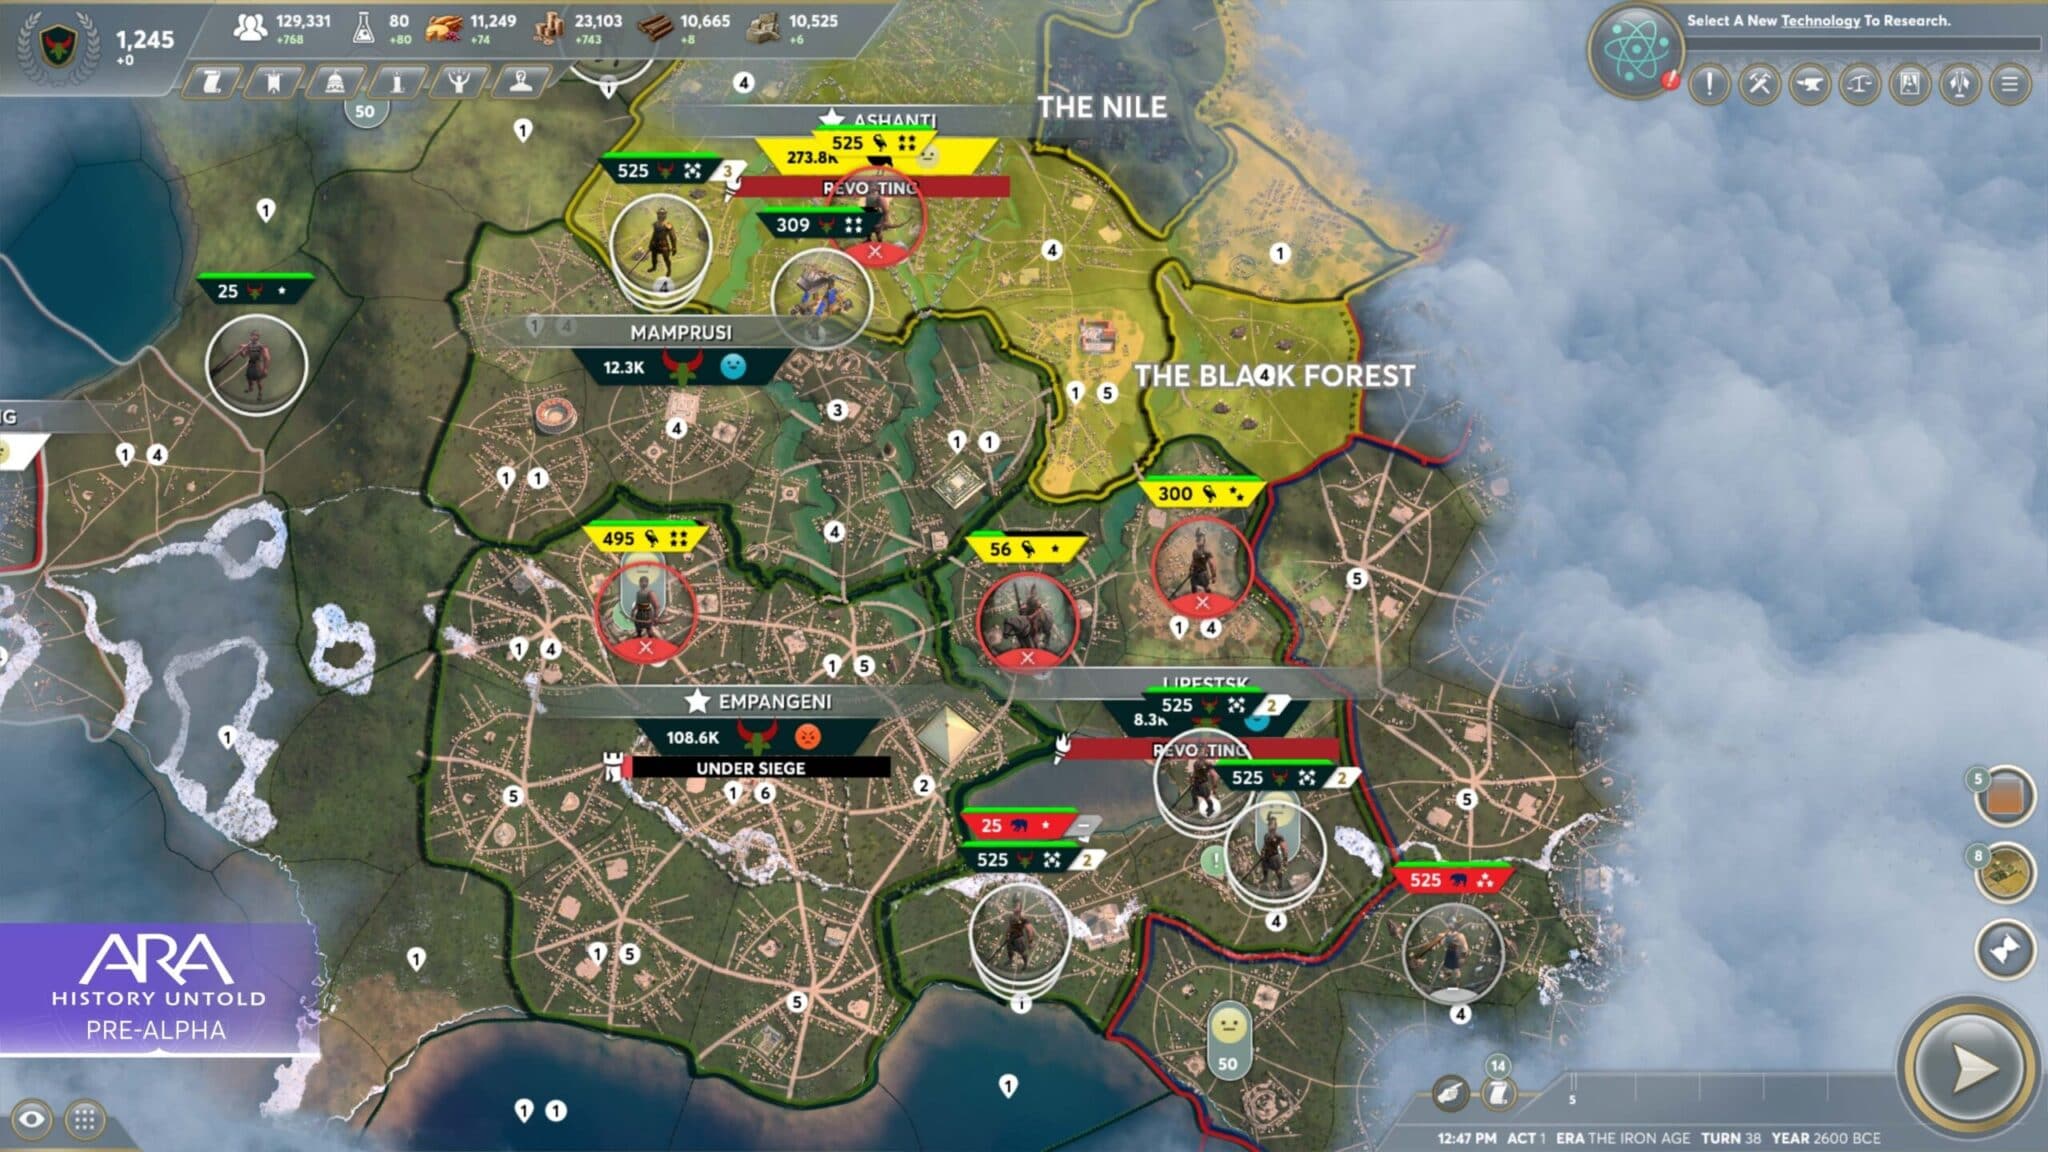 (There is much more to see on this screenshot. We recognise first units like swordsmen, light horsemen and catapults. We also get an idea of how the areas are divided into small sectors. Apparently Ara also works with districts. Famous landmarks are also visible).